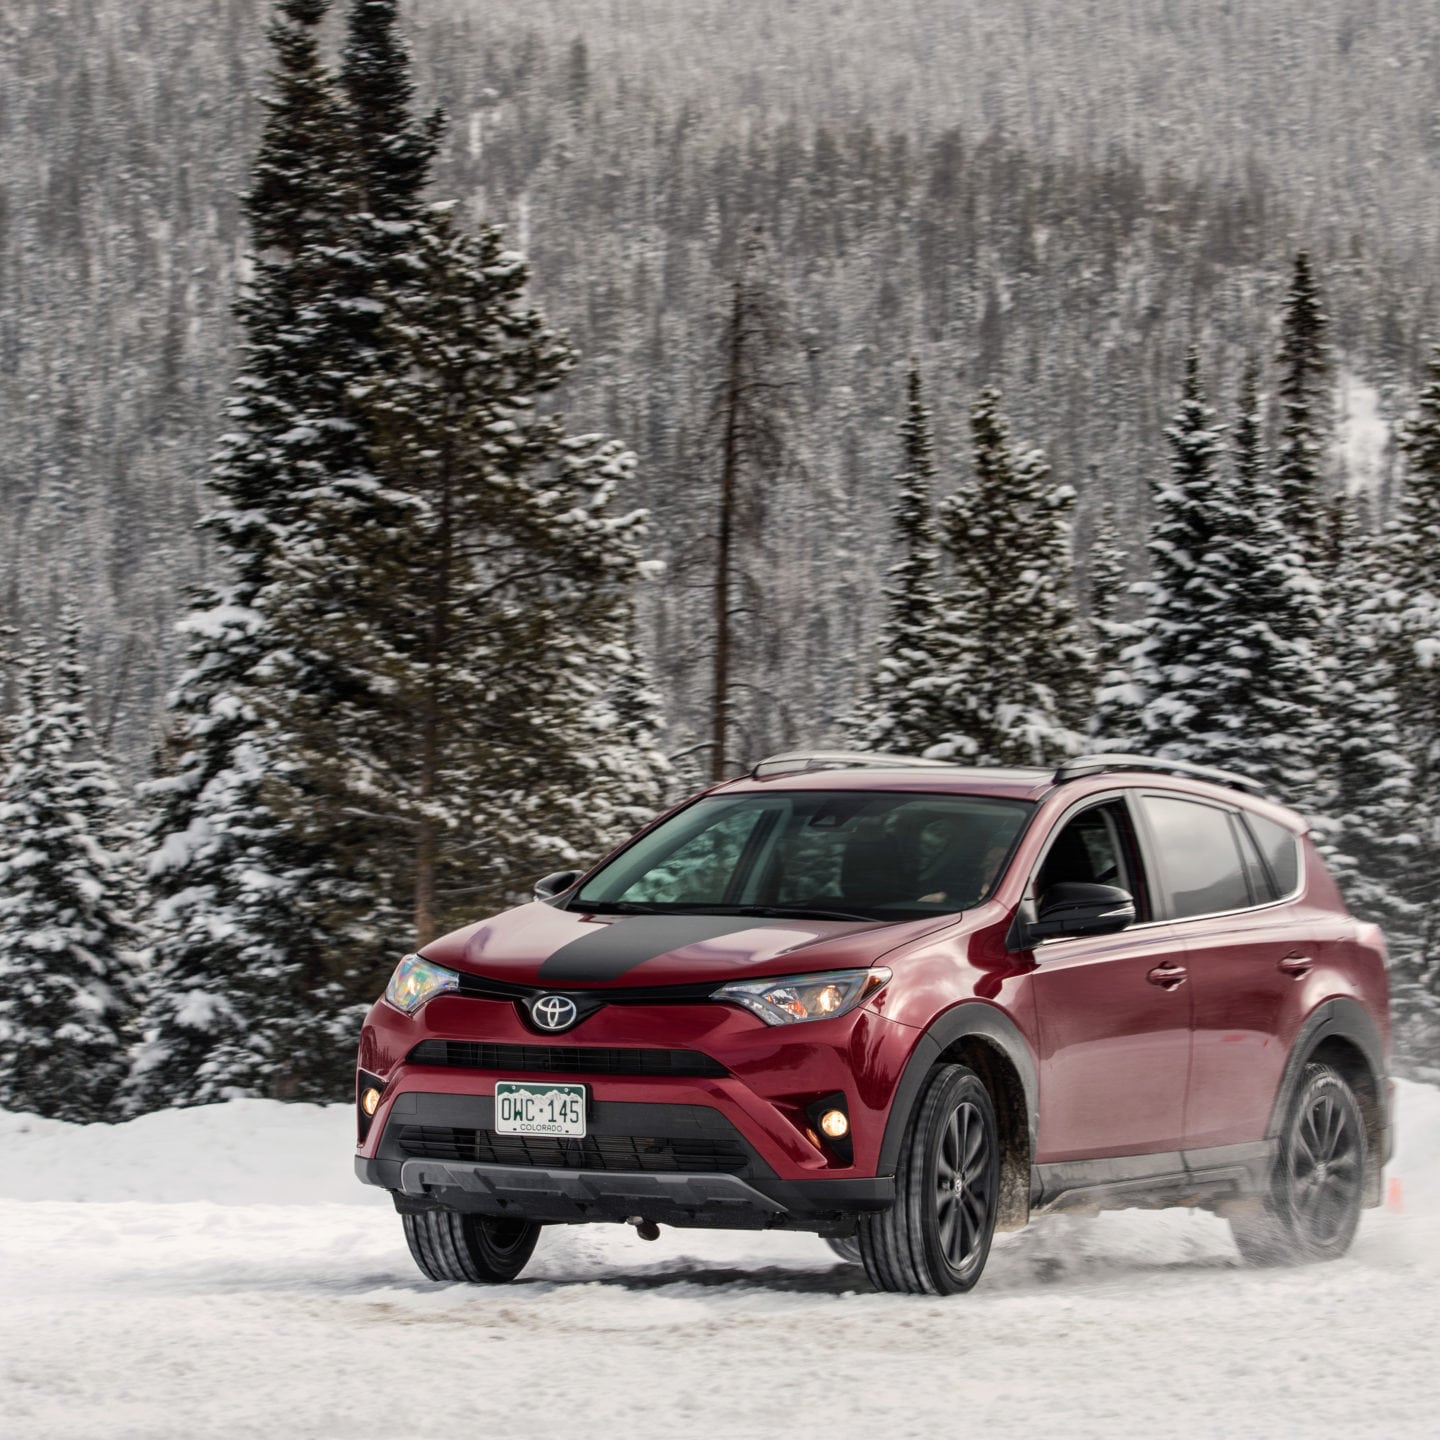 2018 Toyota RAV4 Brings Adventure To the Tiny Crossover That Started It All